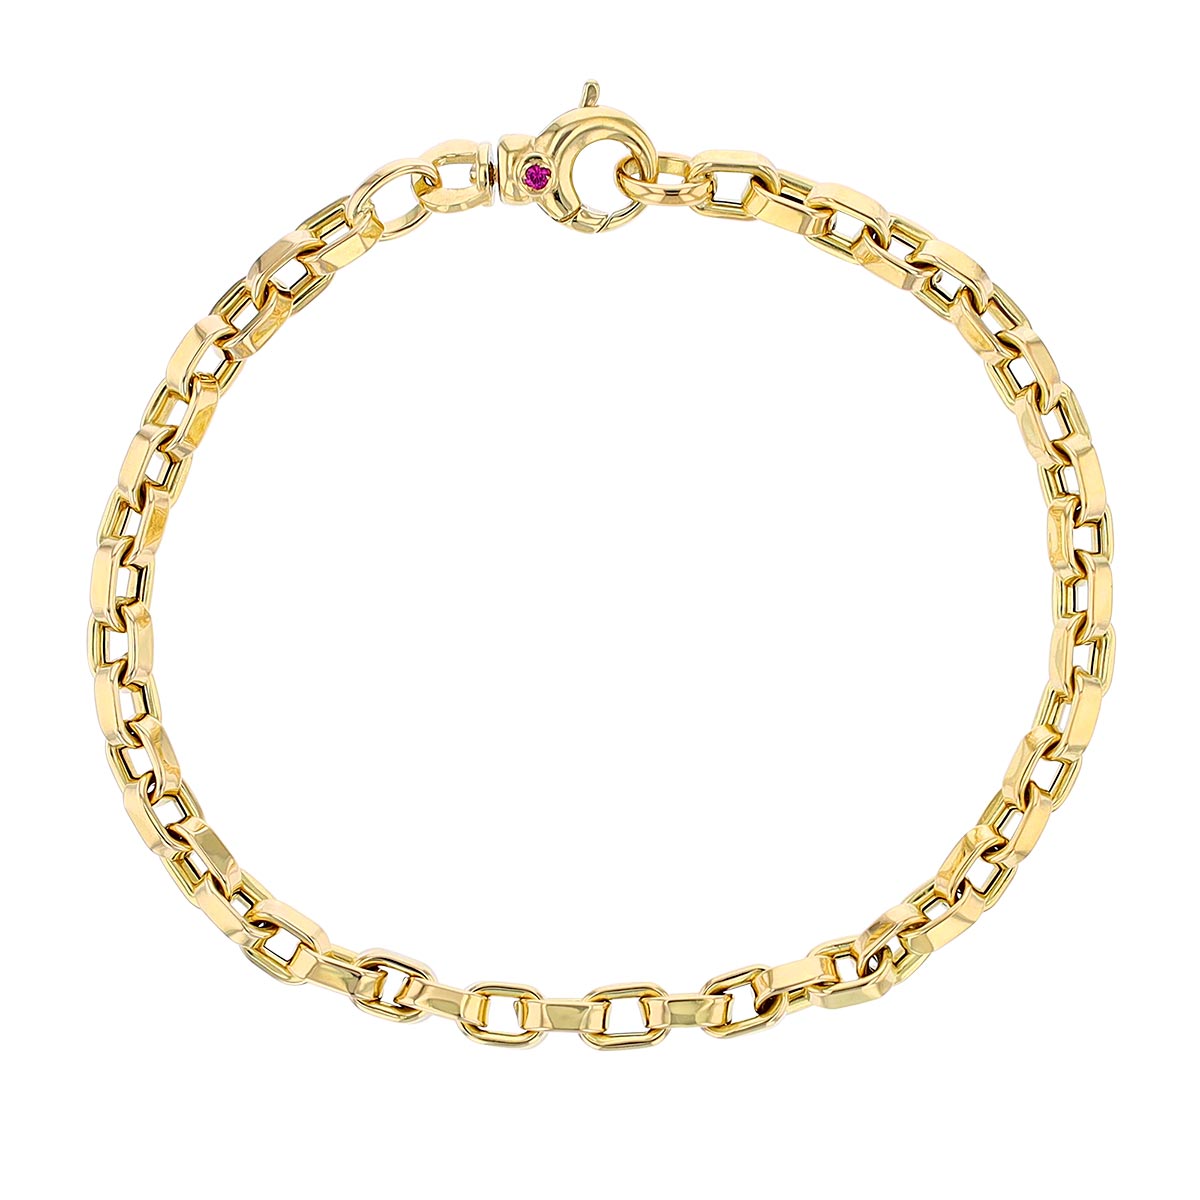 Roberto Coin Designer Gold Yellow Gold Square Link Chain Bracelet, 7